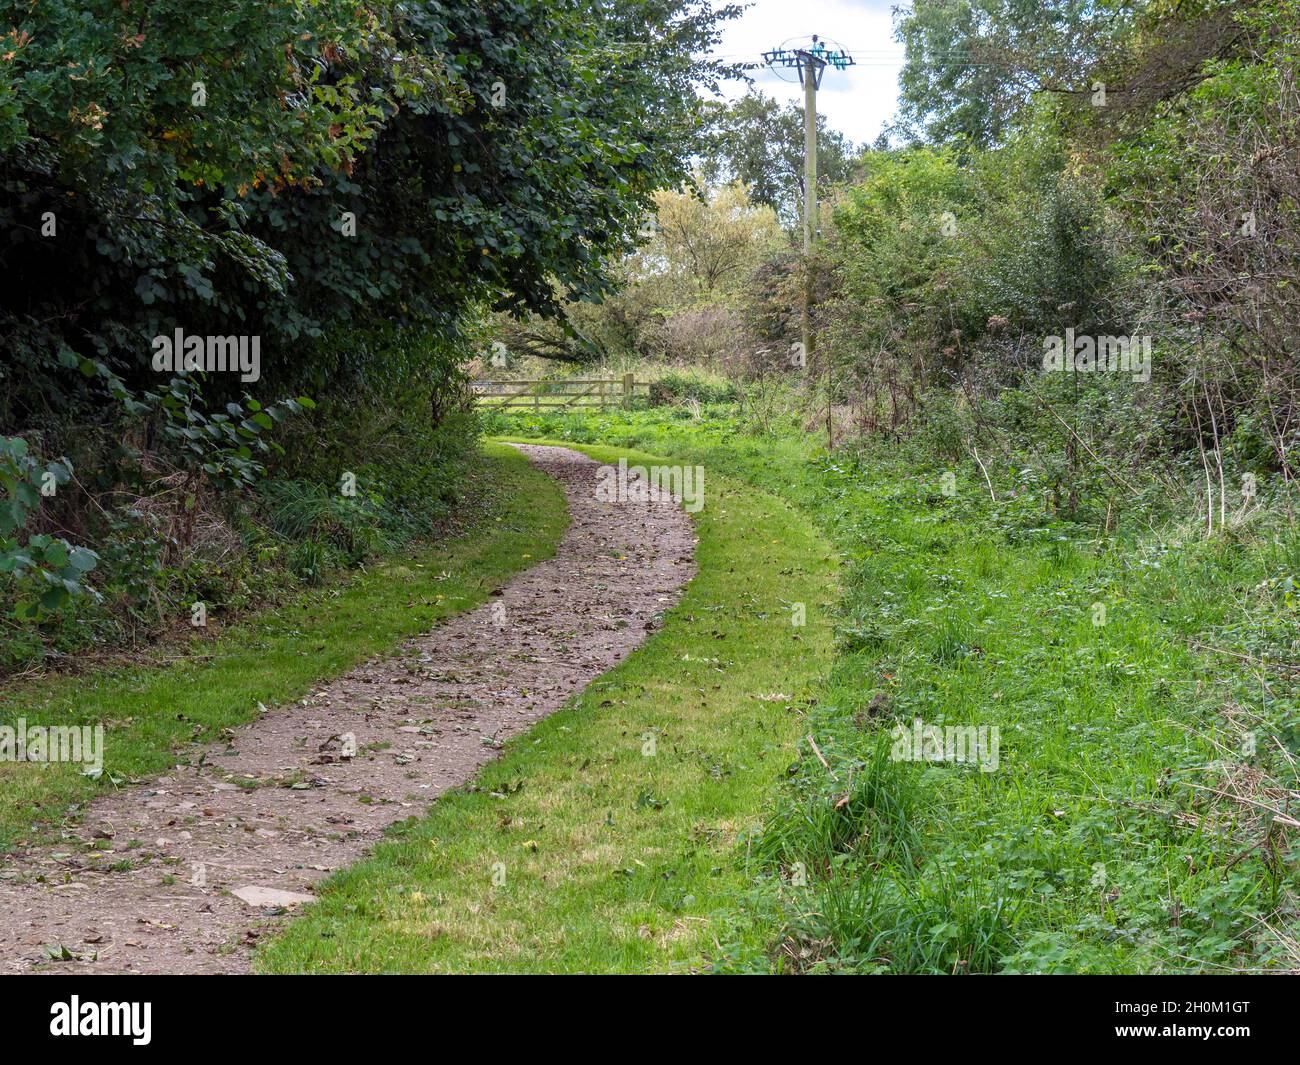 Footpath through grass and trees with fallen leaves Stock Photo